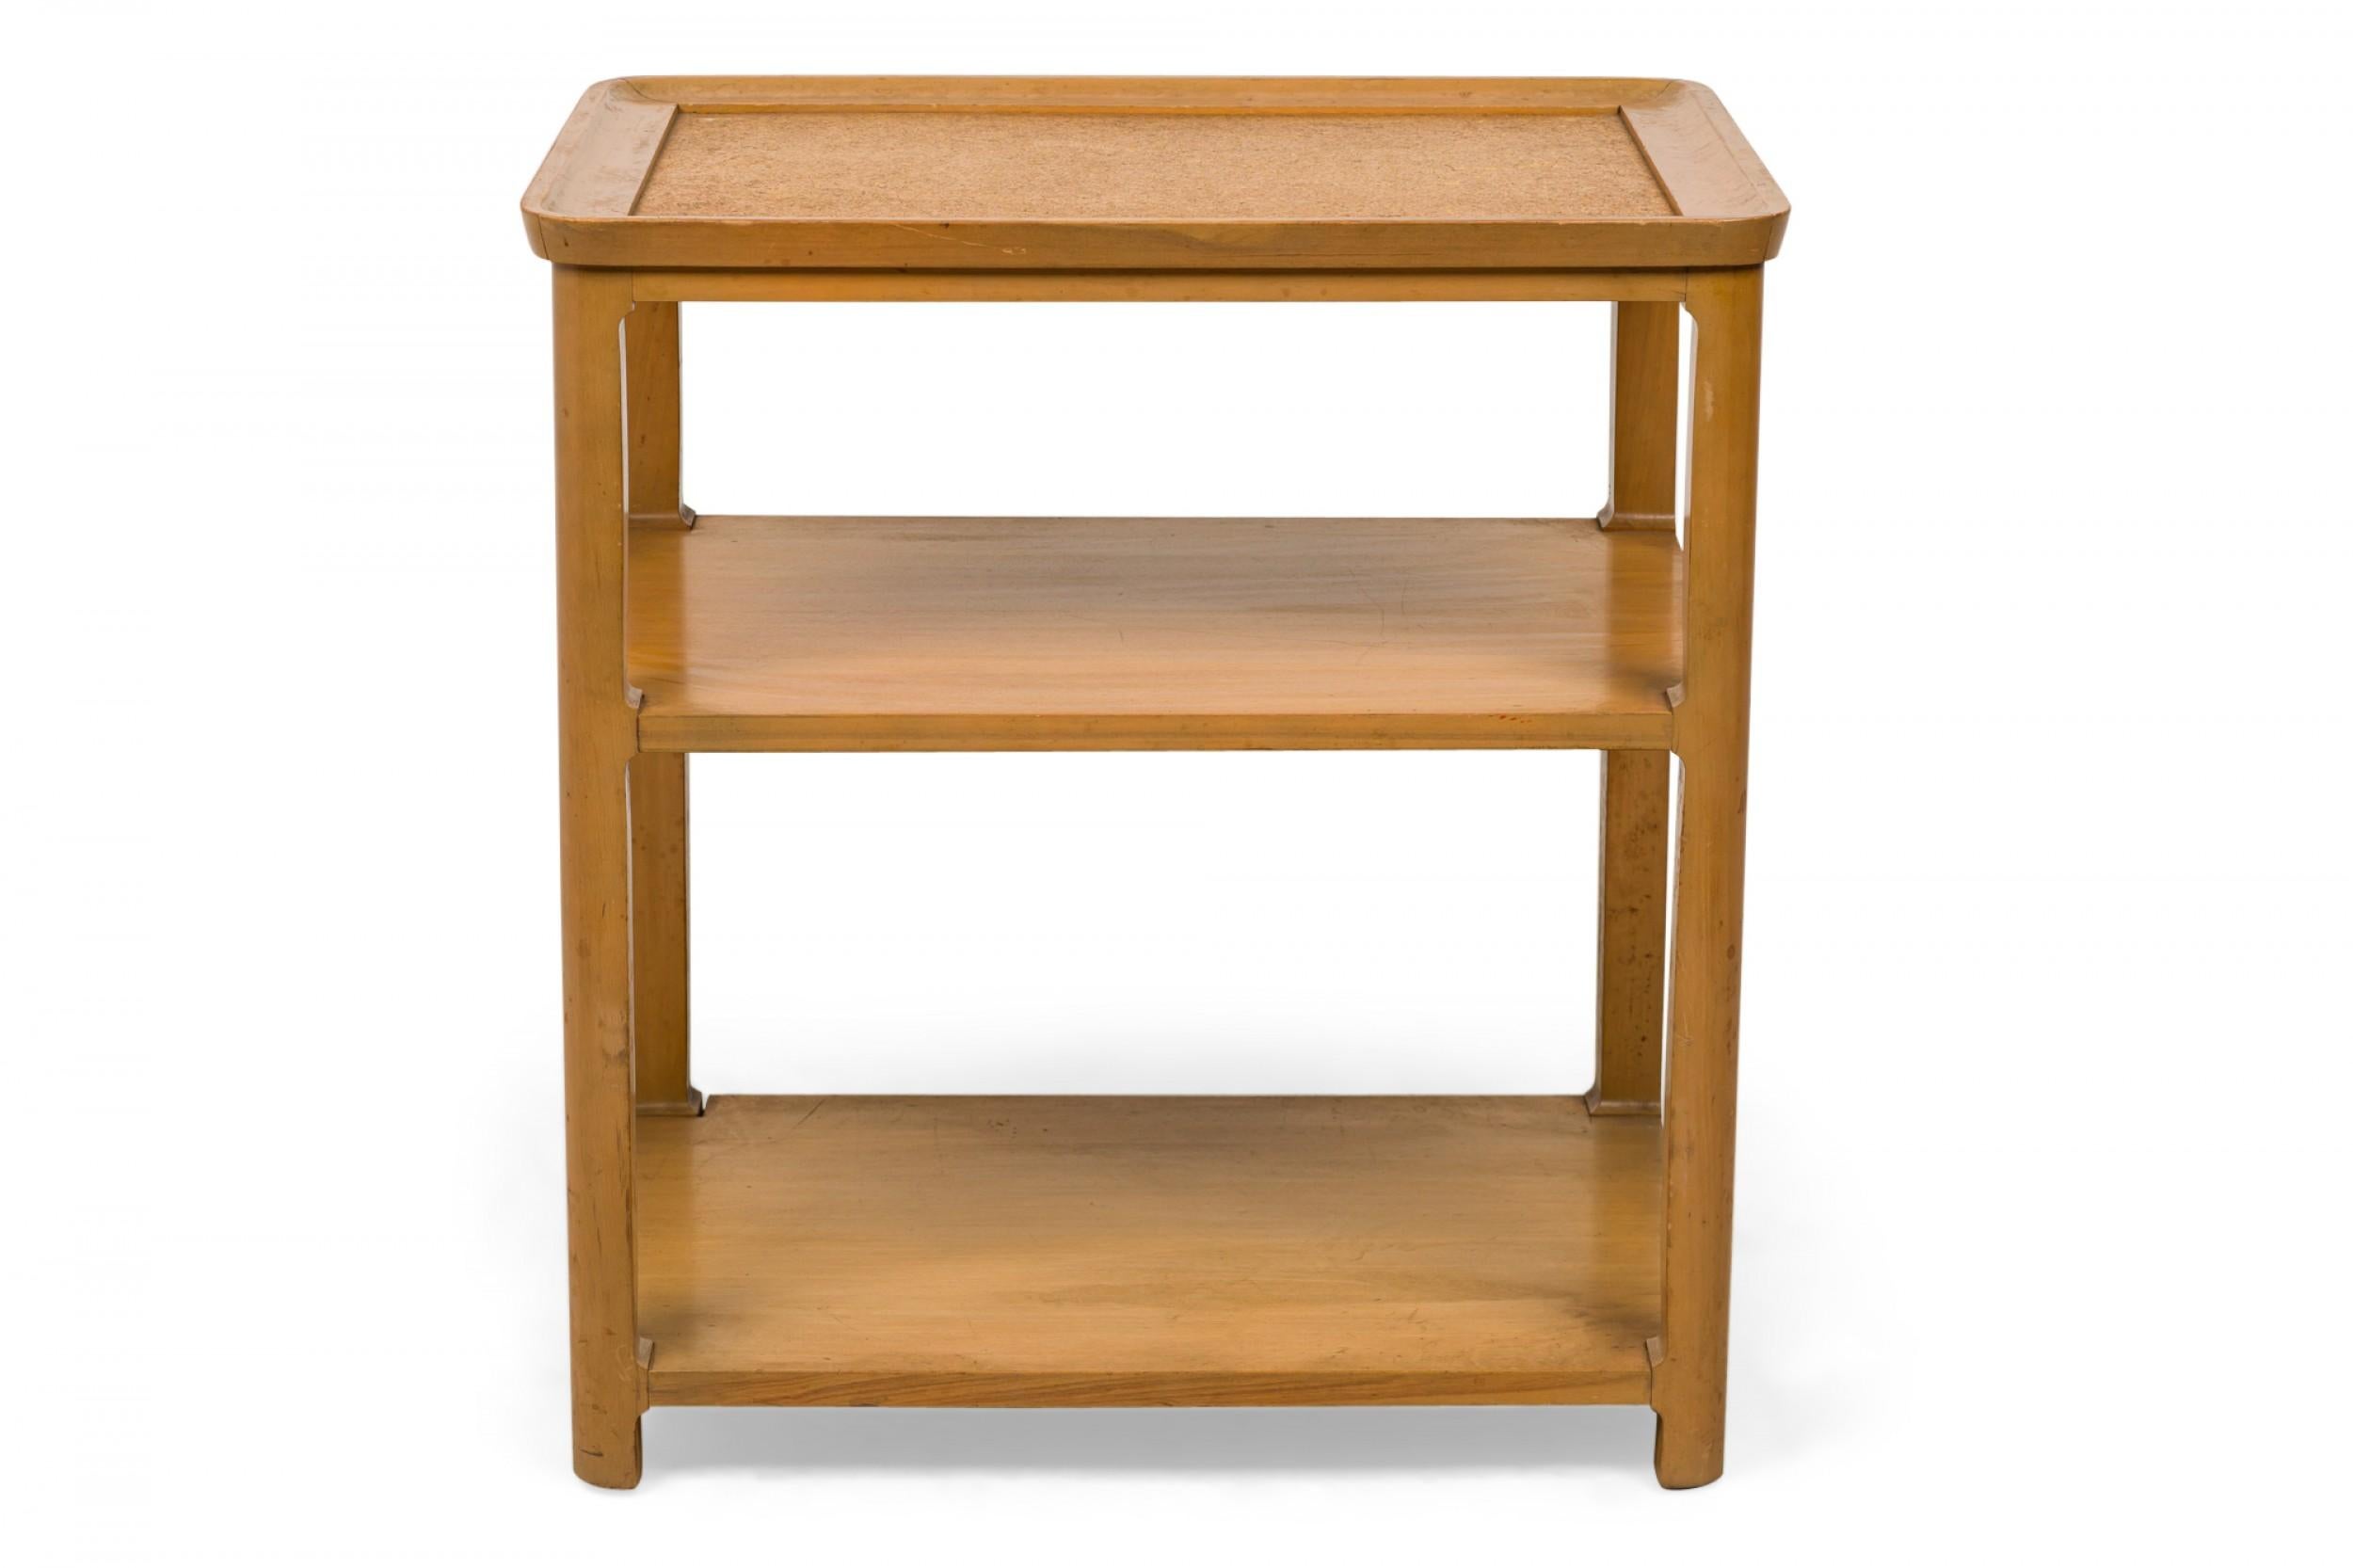 Pair of American mid-century rectangular three-tier end / side tables with blonde wood frames with rounded edges and an inset cork top with two wooden shelves below. (EDWARD WORMLEY FOR DREXEL)(PRICED AS PAIR)